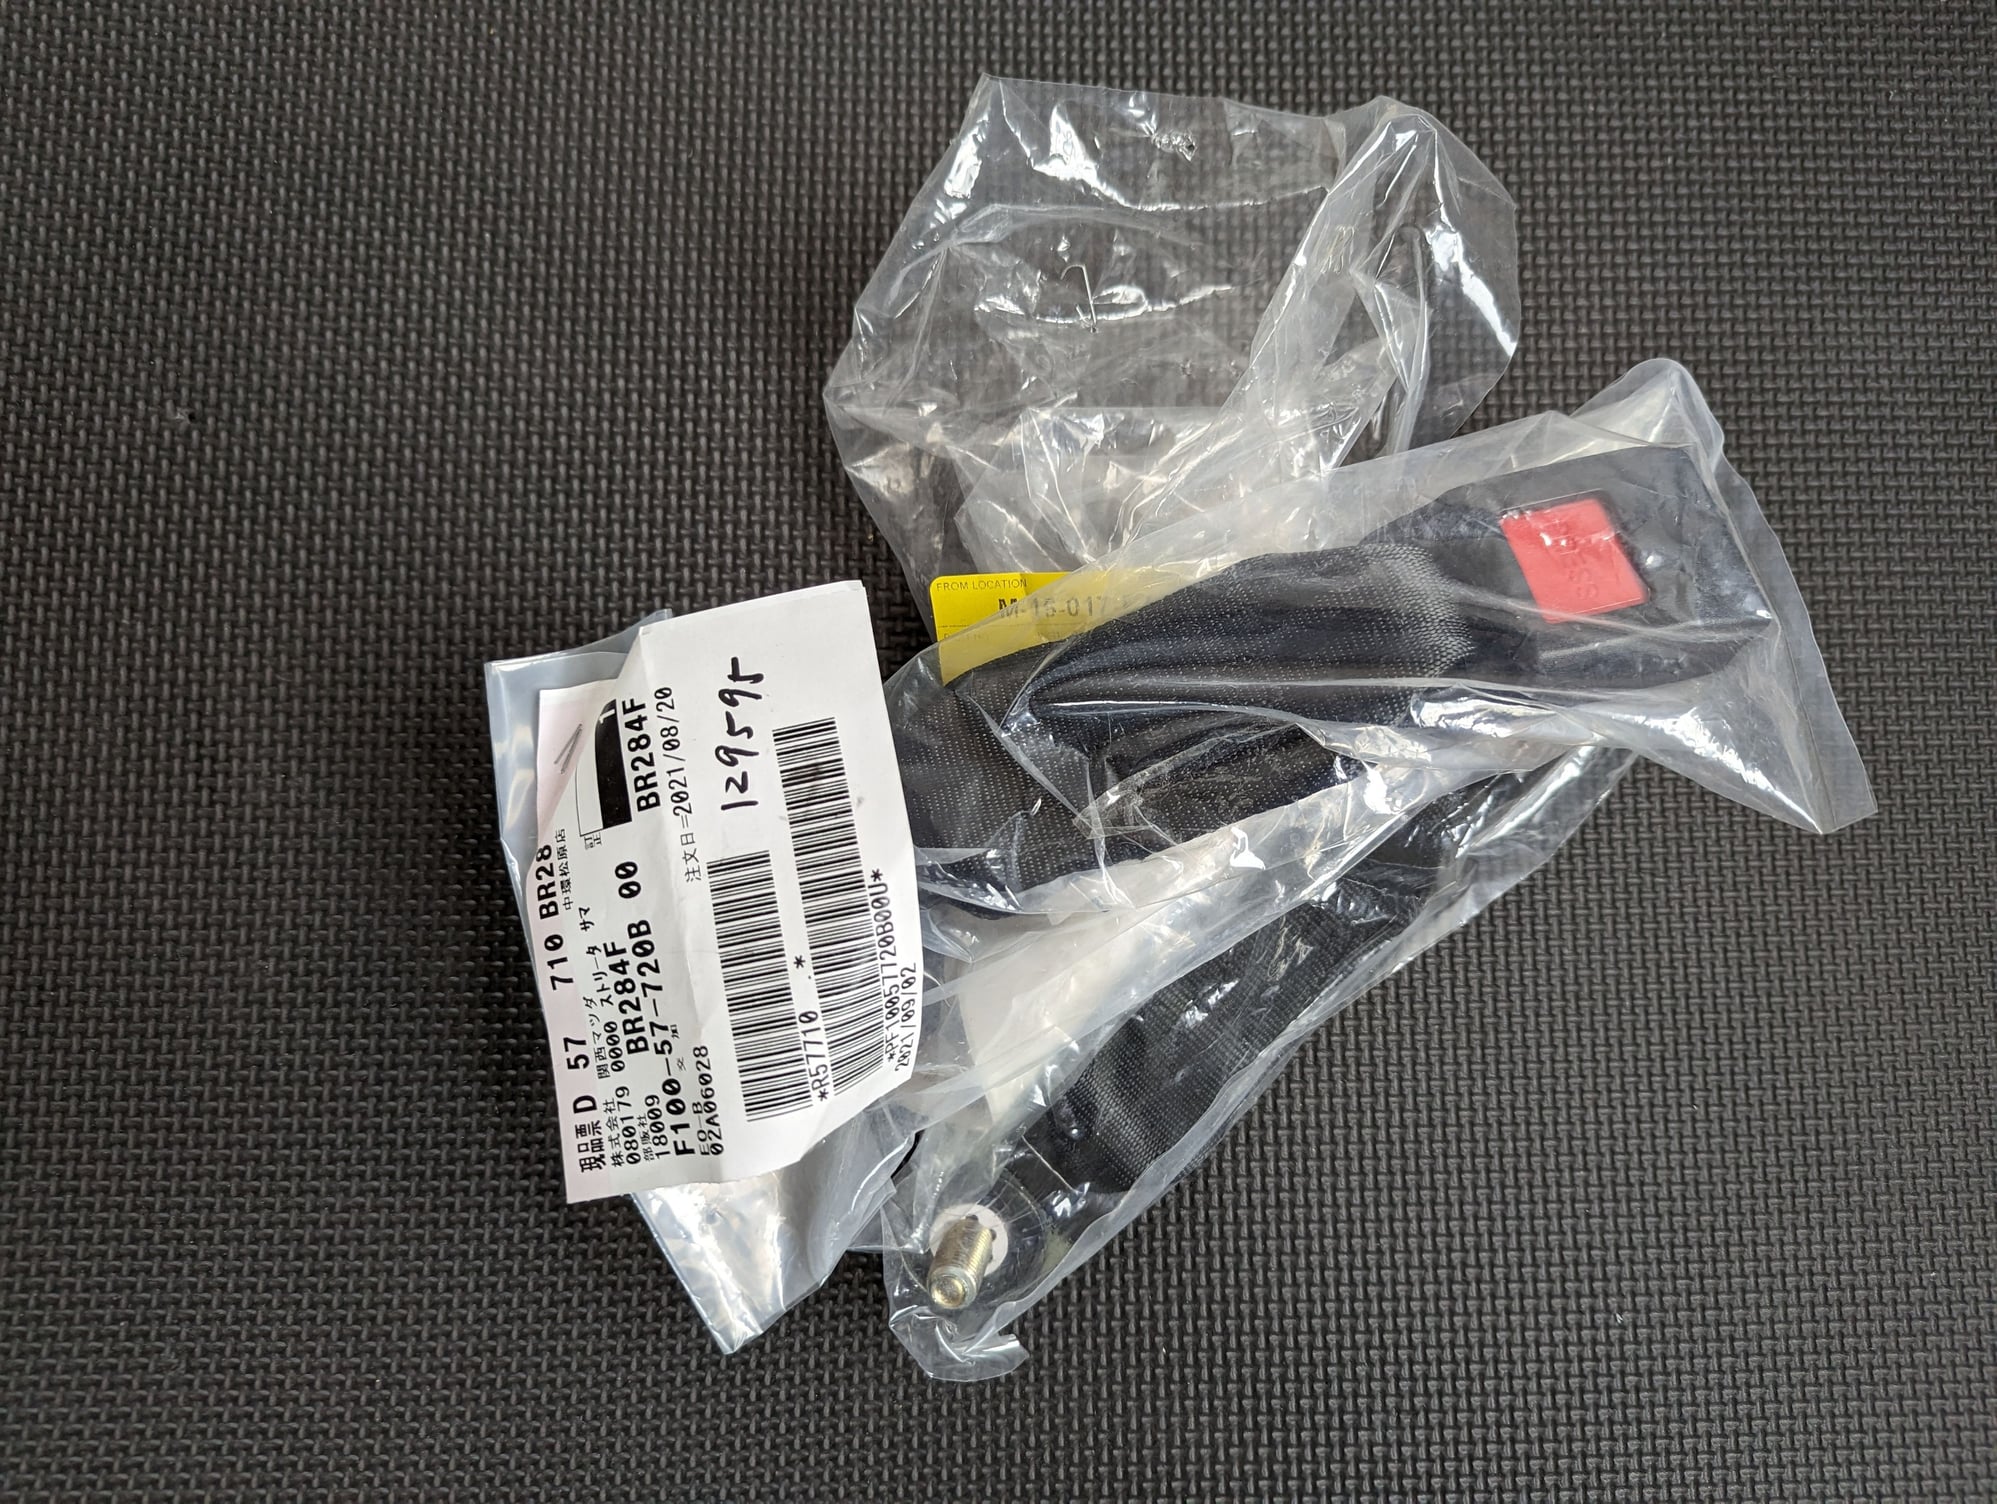 Miscellaneous - FS: New and Like-New FD Parts - New - 1993 to 2002 Mazda RX-7 - Winchester, CA 92596, United States